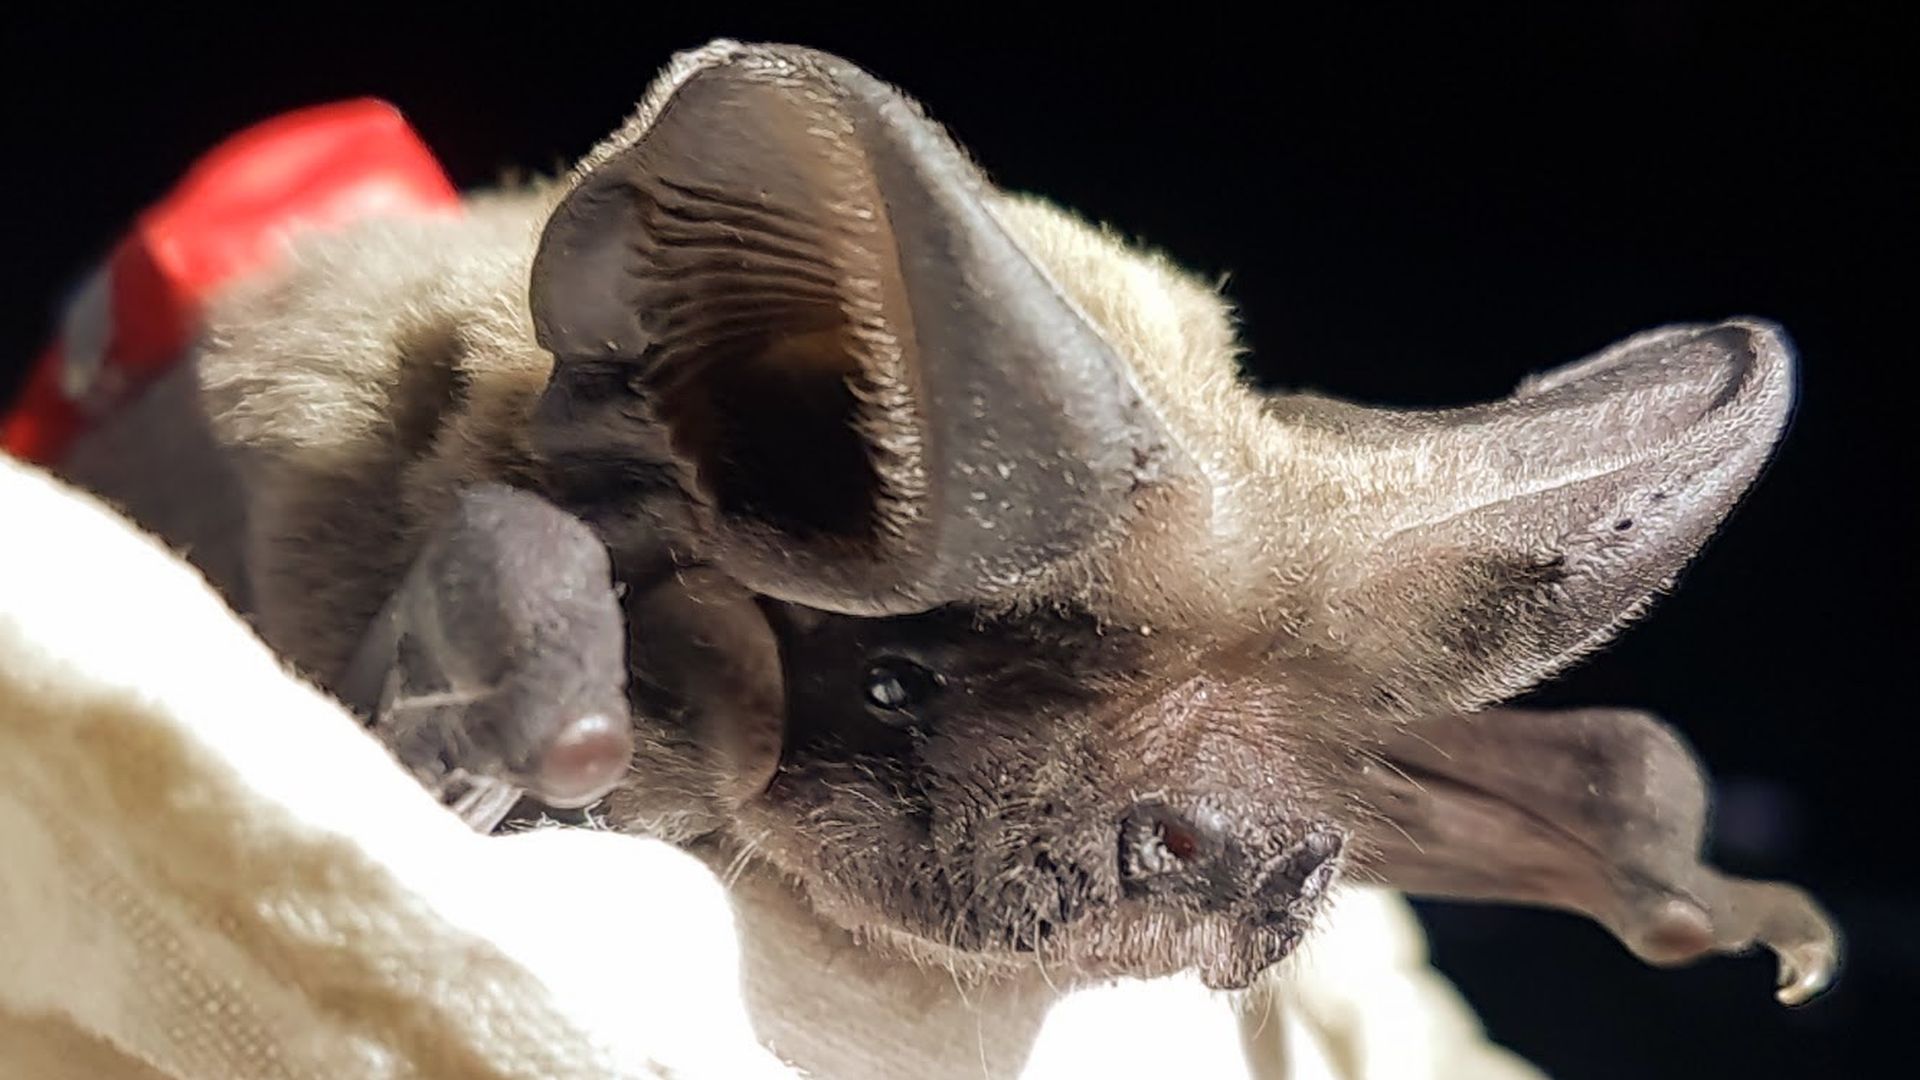 A bat with a GPS tag on its back